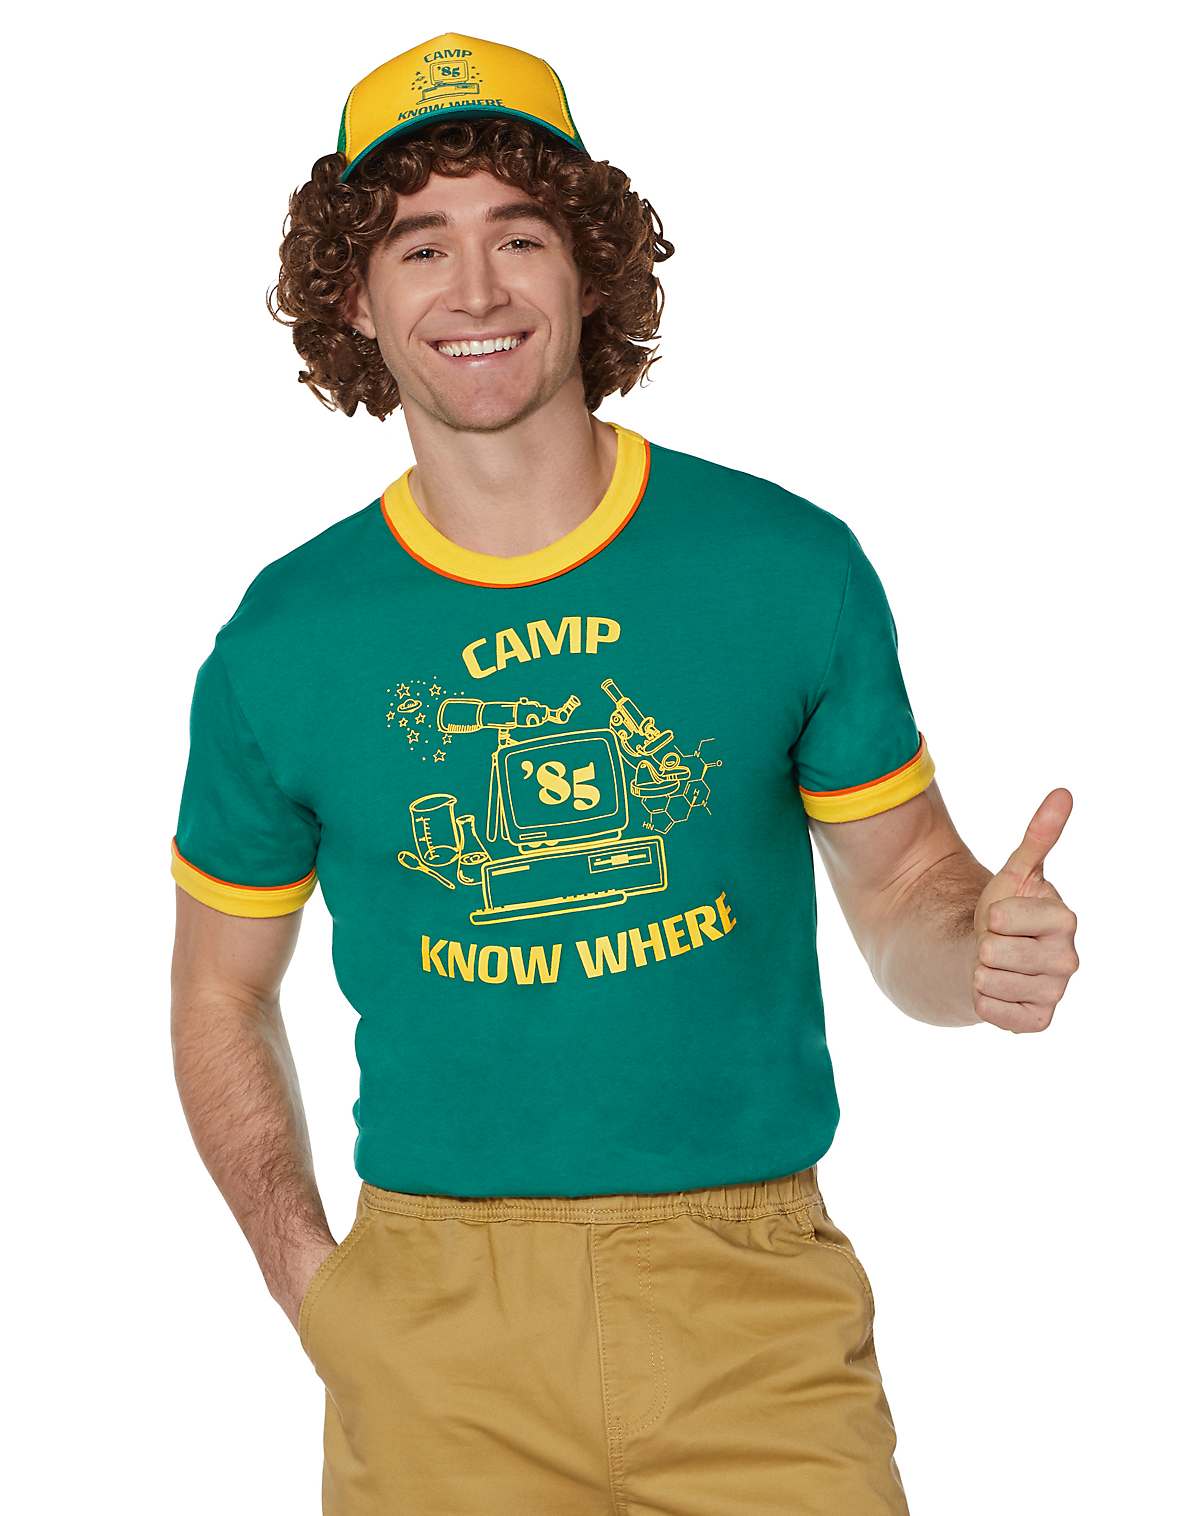 Halloween Costume for Adults Small/Medium Stranger Things Party City Dustin’s “Camp Know Where” T-Shirt 